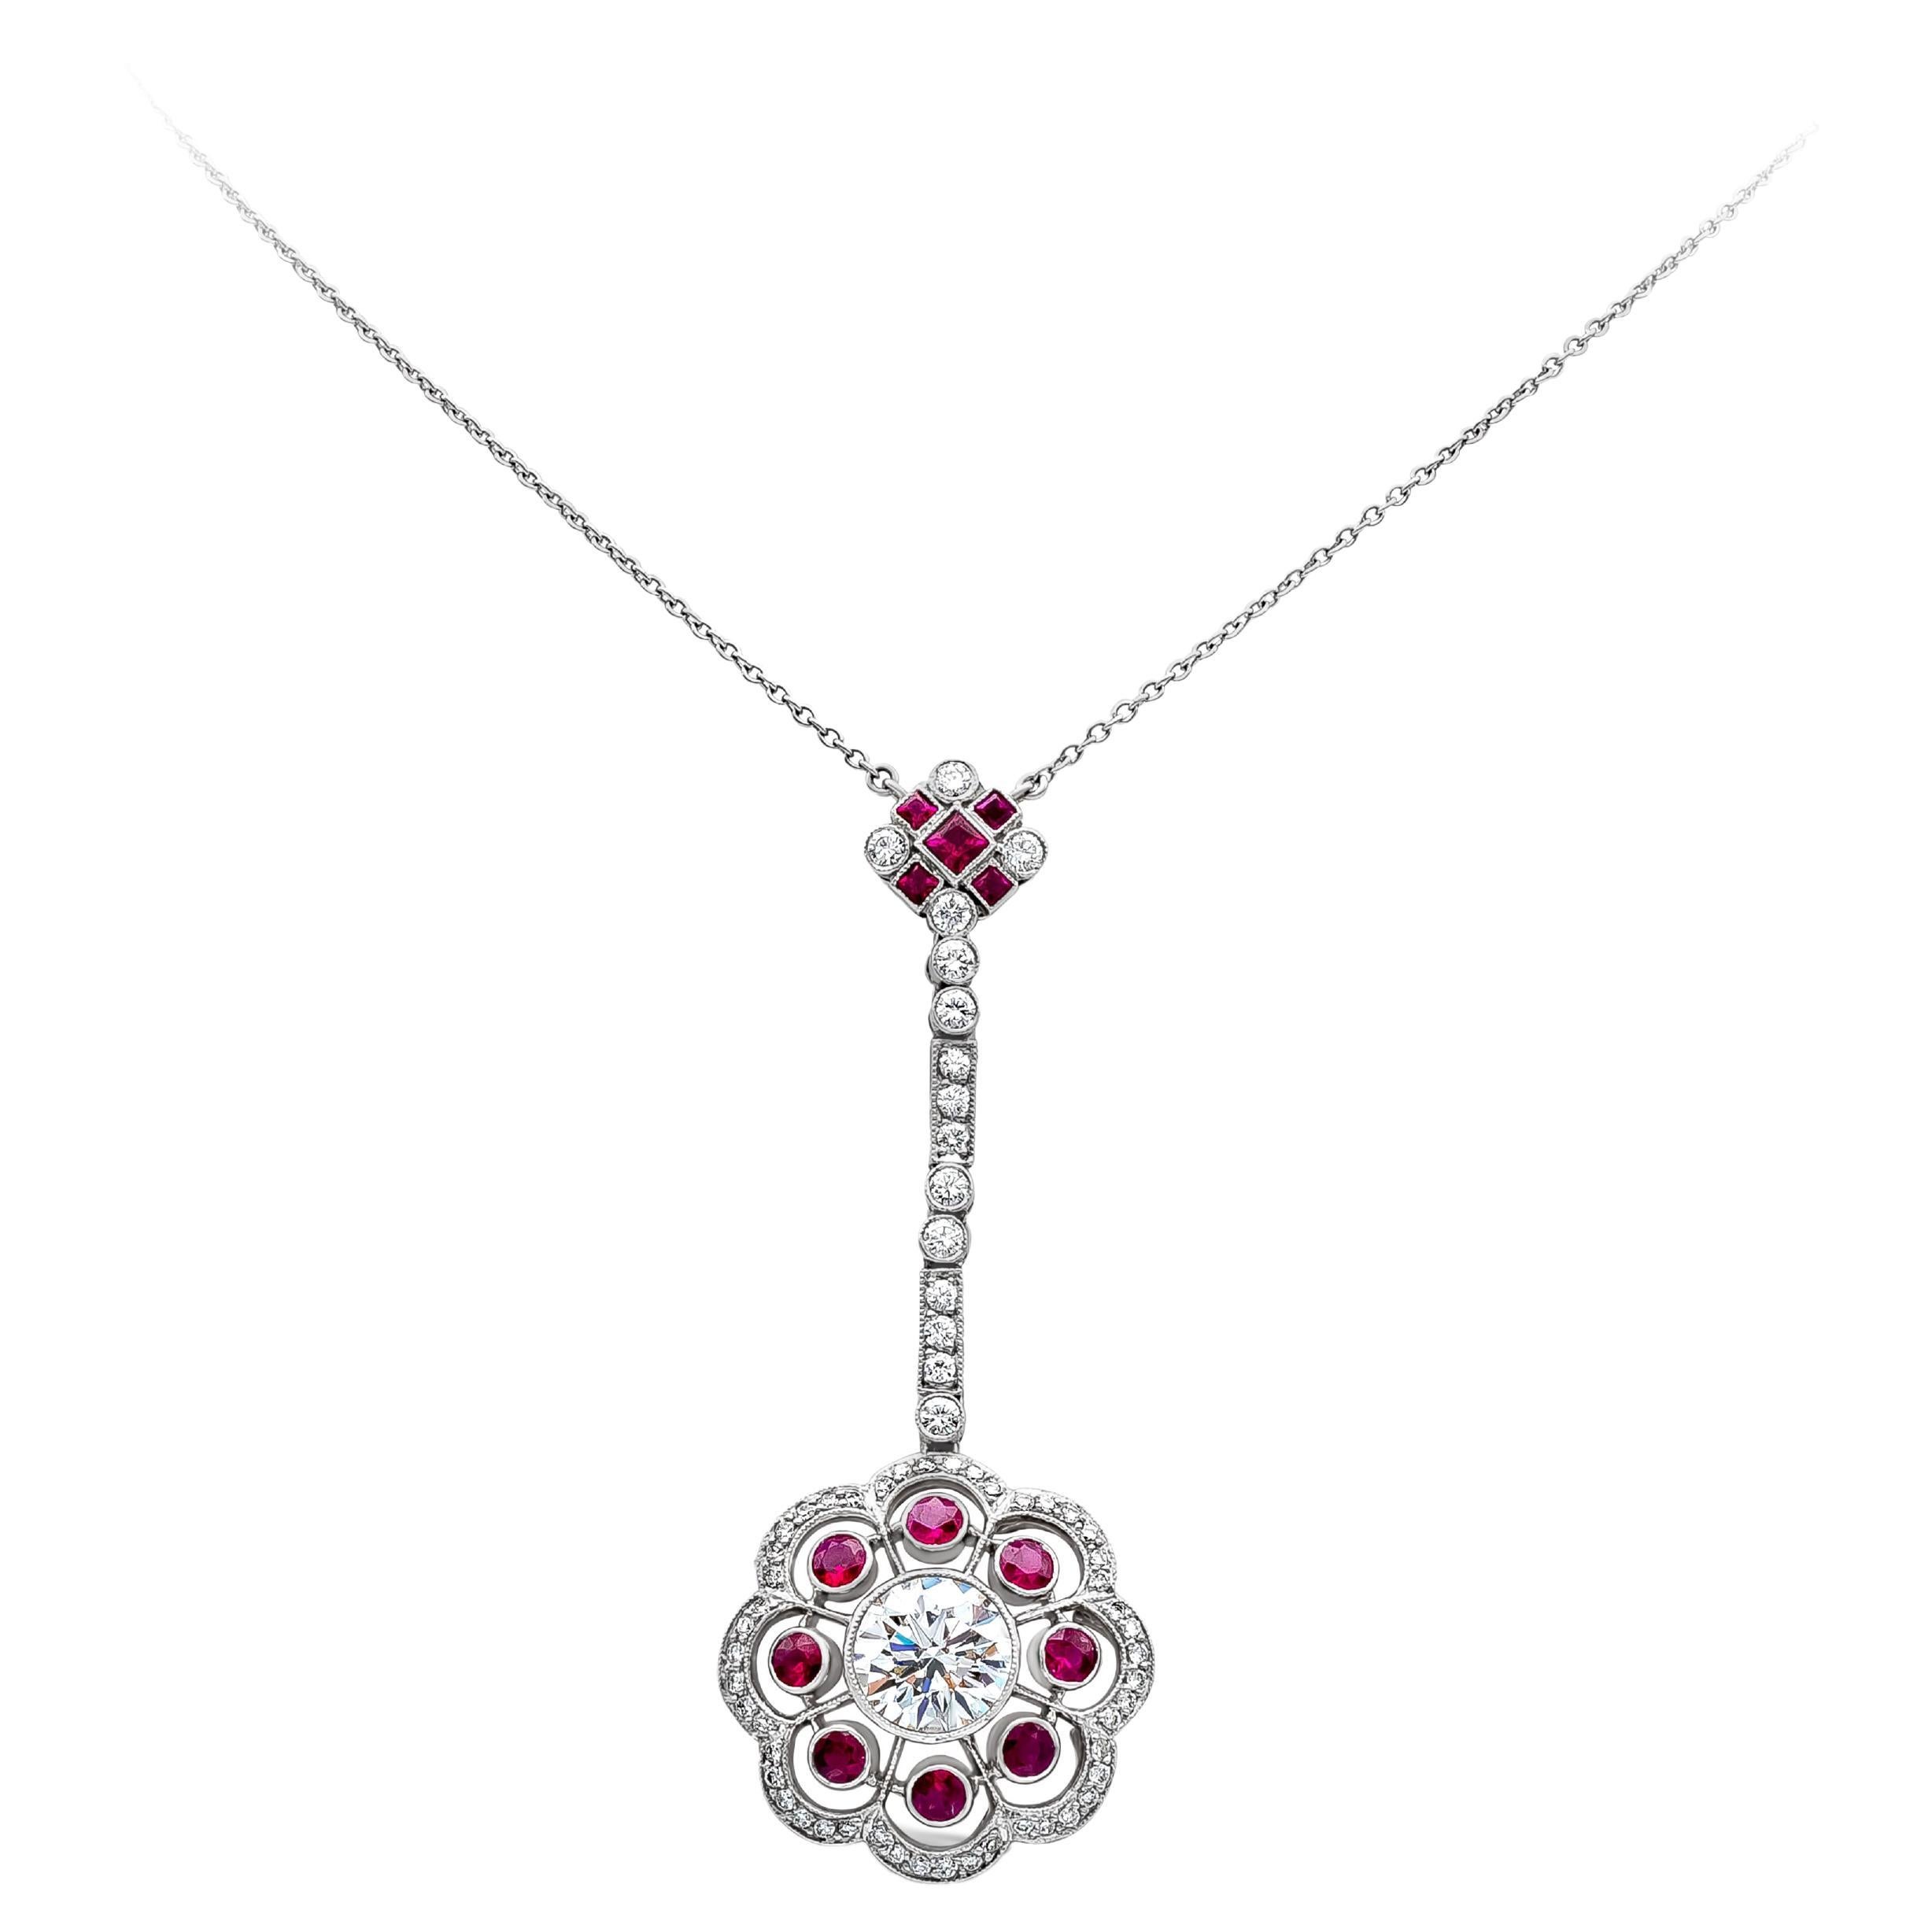 Roman Malakov 3.39 Carats Total Ruby and Diamond Floral Motif Drop Necklace For Sale